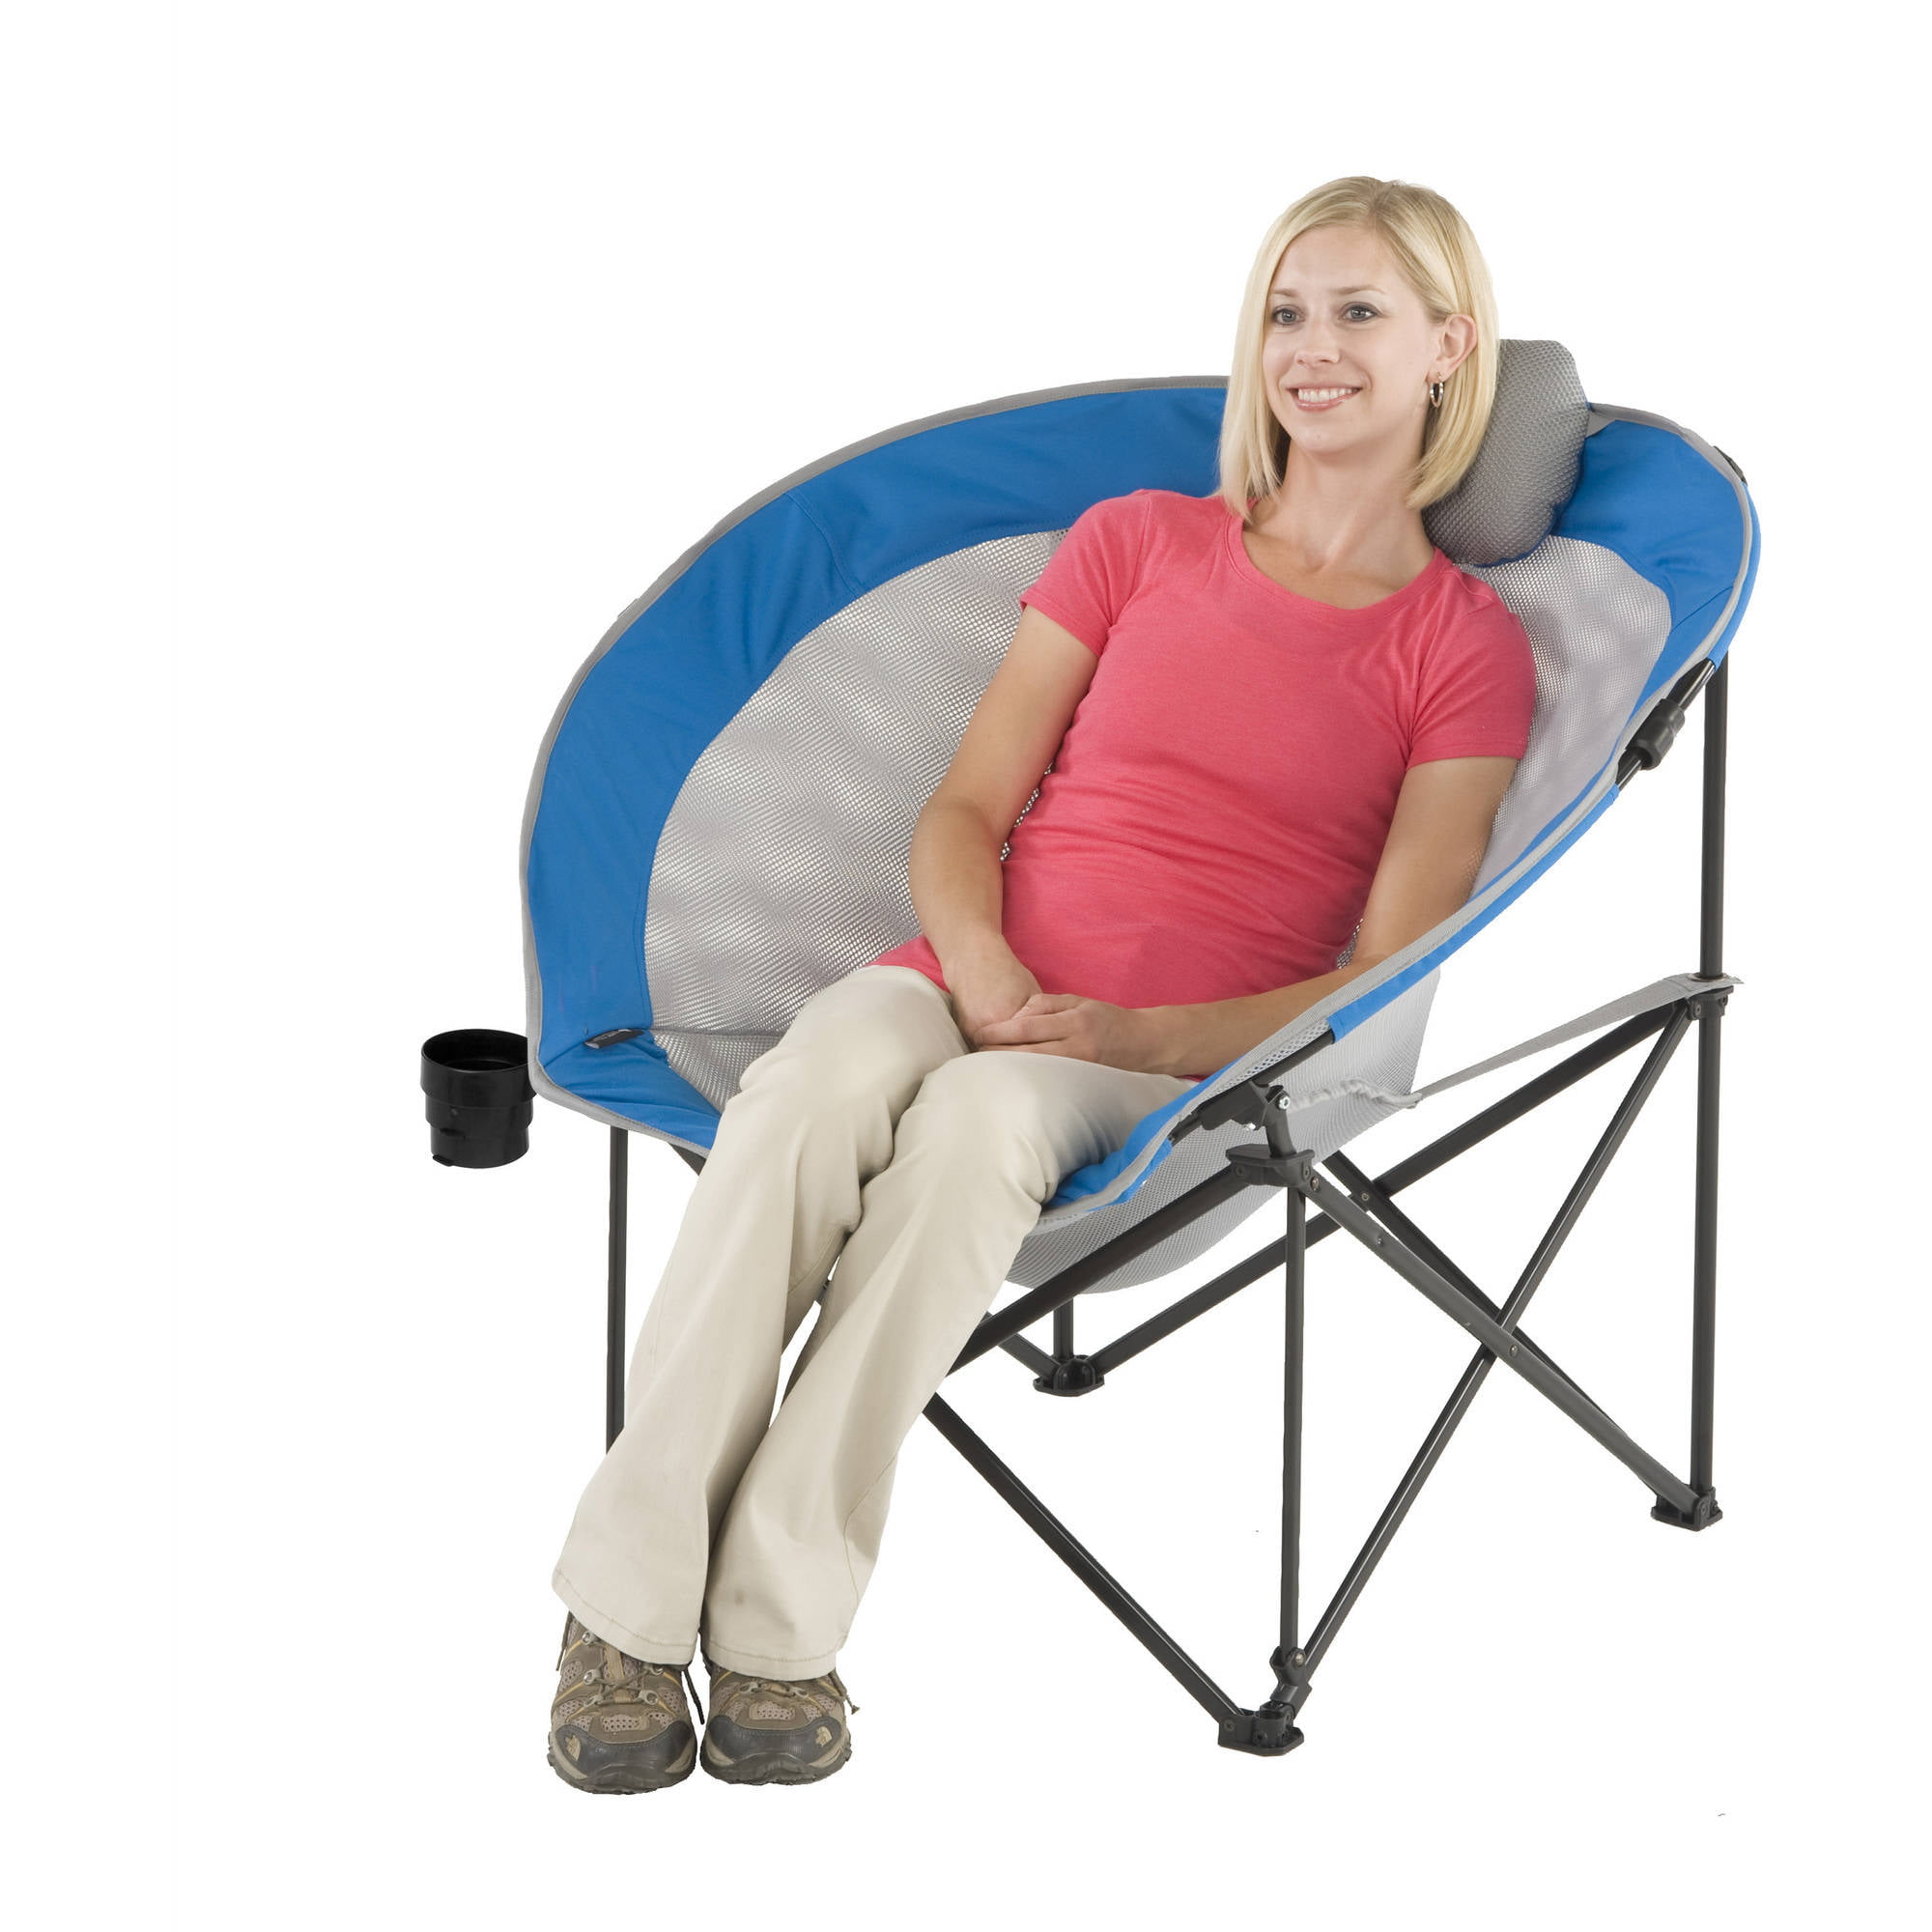 walmart oversized camping chair